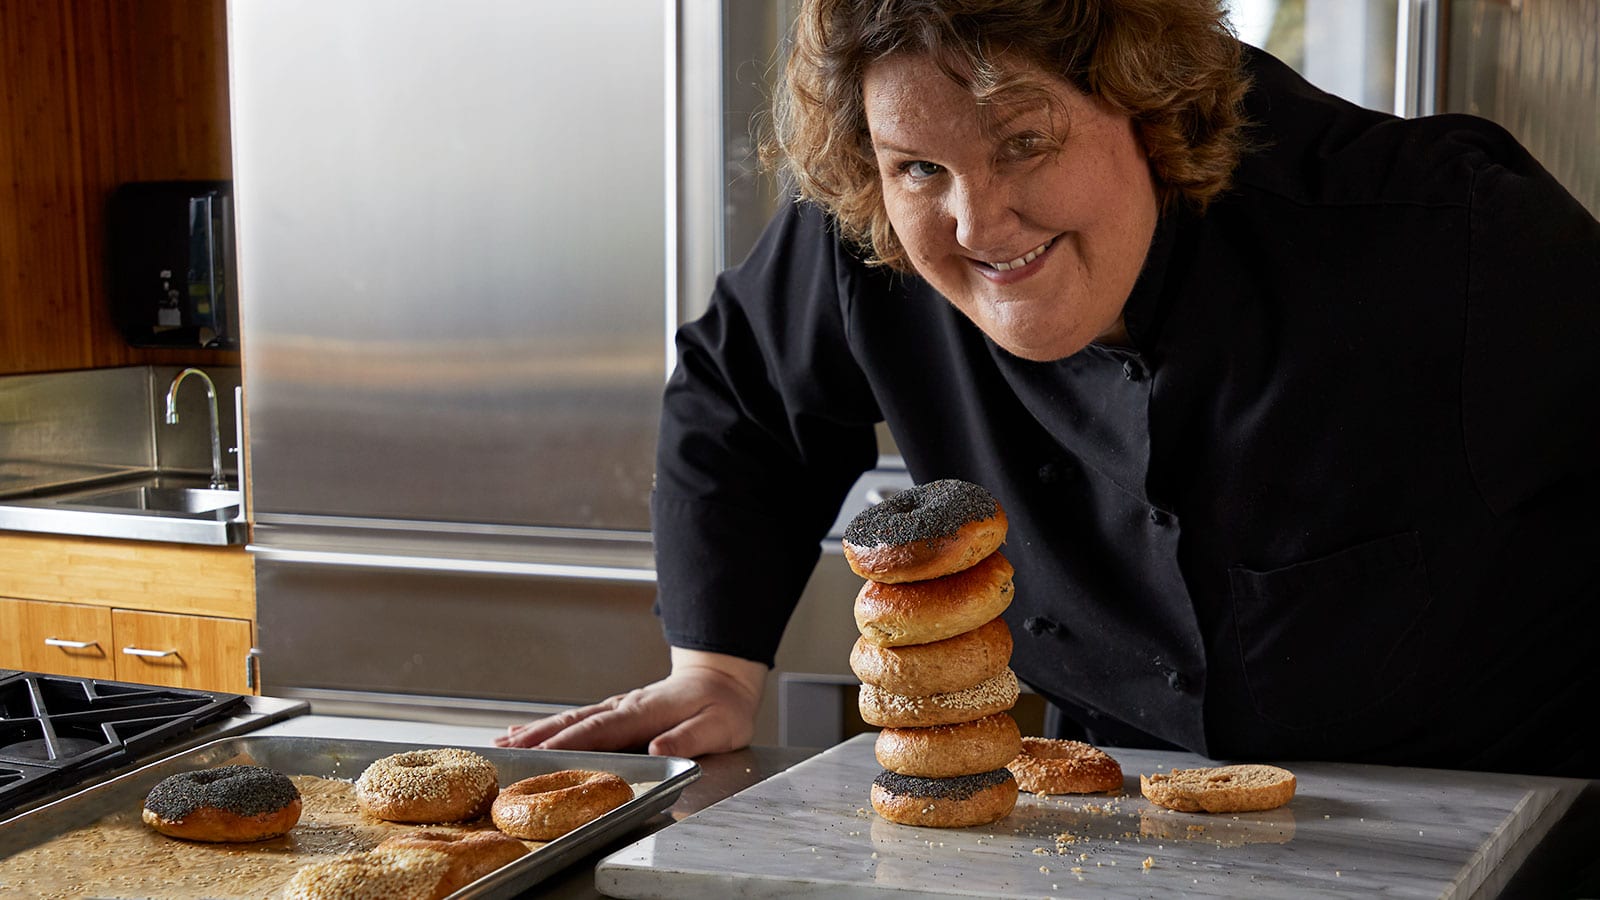 PCC Cooks instructor, Laurie Pfalzer, proudly poses with fresh baked bagels from her class, Homemade Bagels and Pretzels.